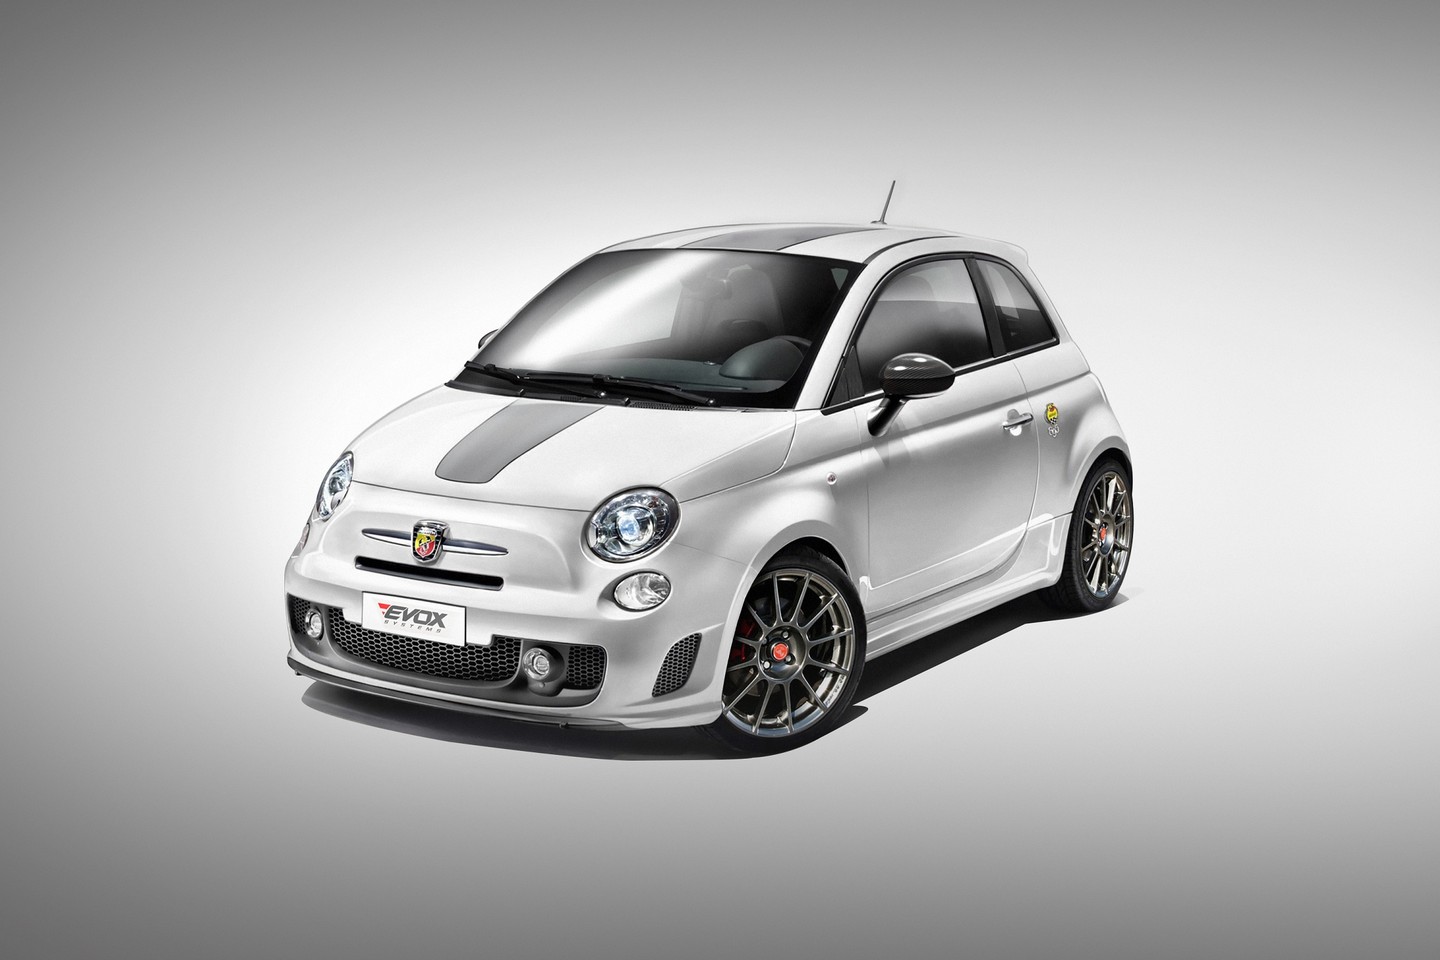 Abarth’s-tuned-models-get-their-own-tuning-courtesy-of-Alpha-N-Performance-1